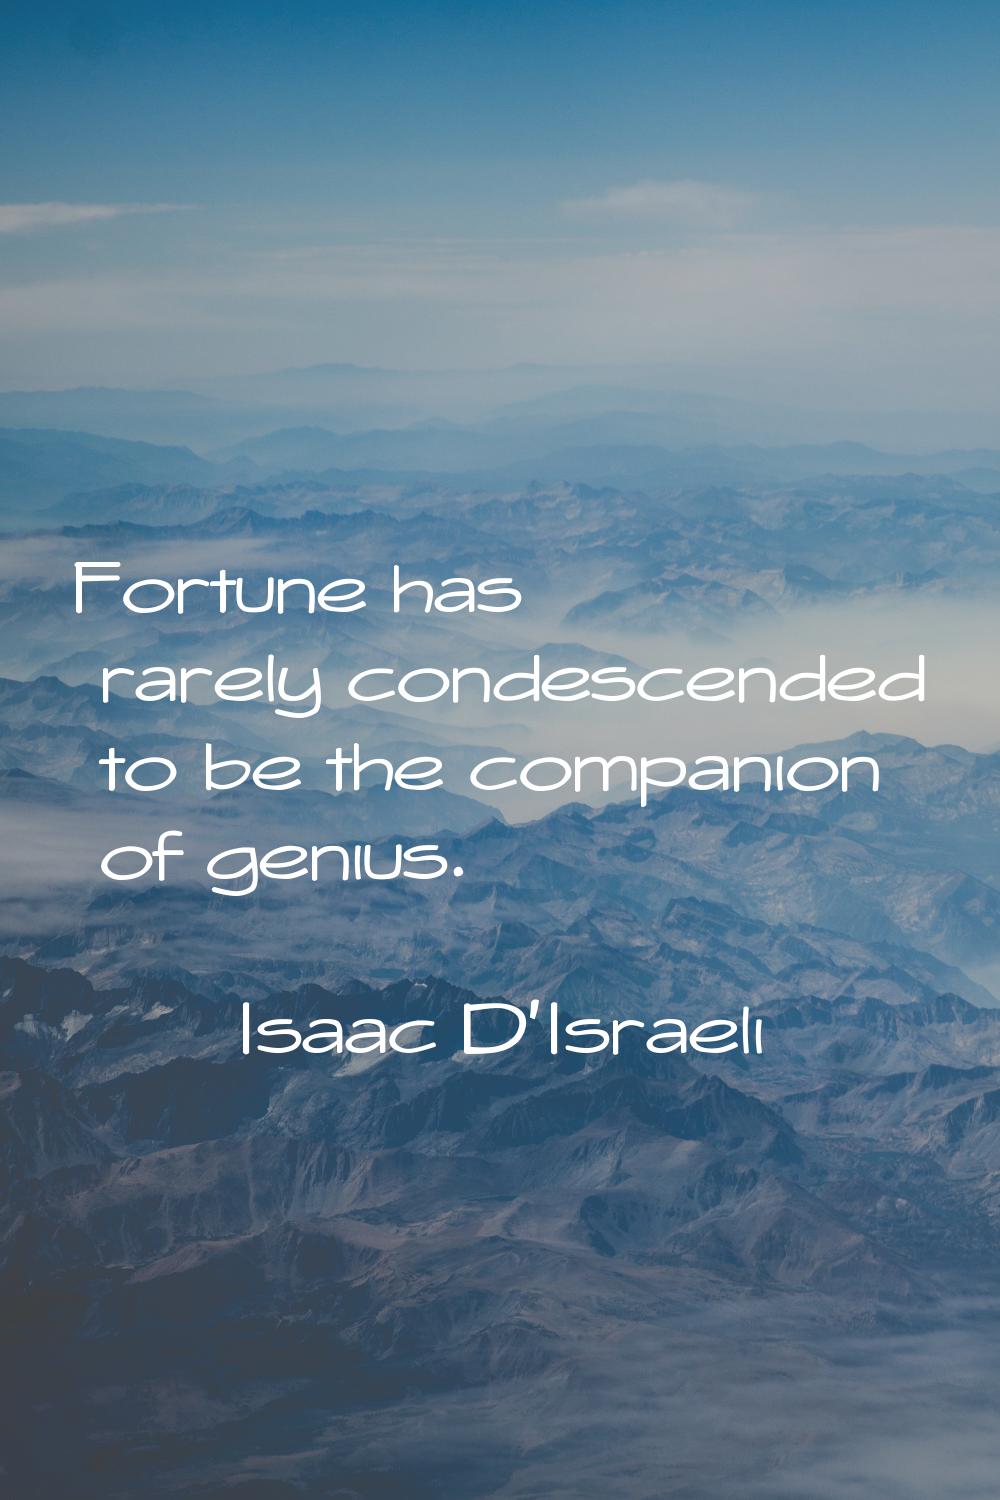 Fortune has rarely condescended to be the companion of genius.